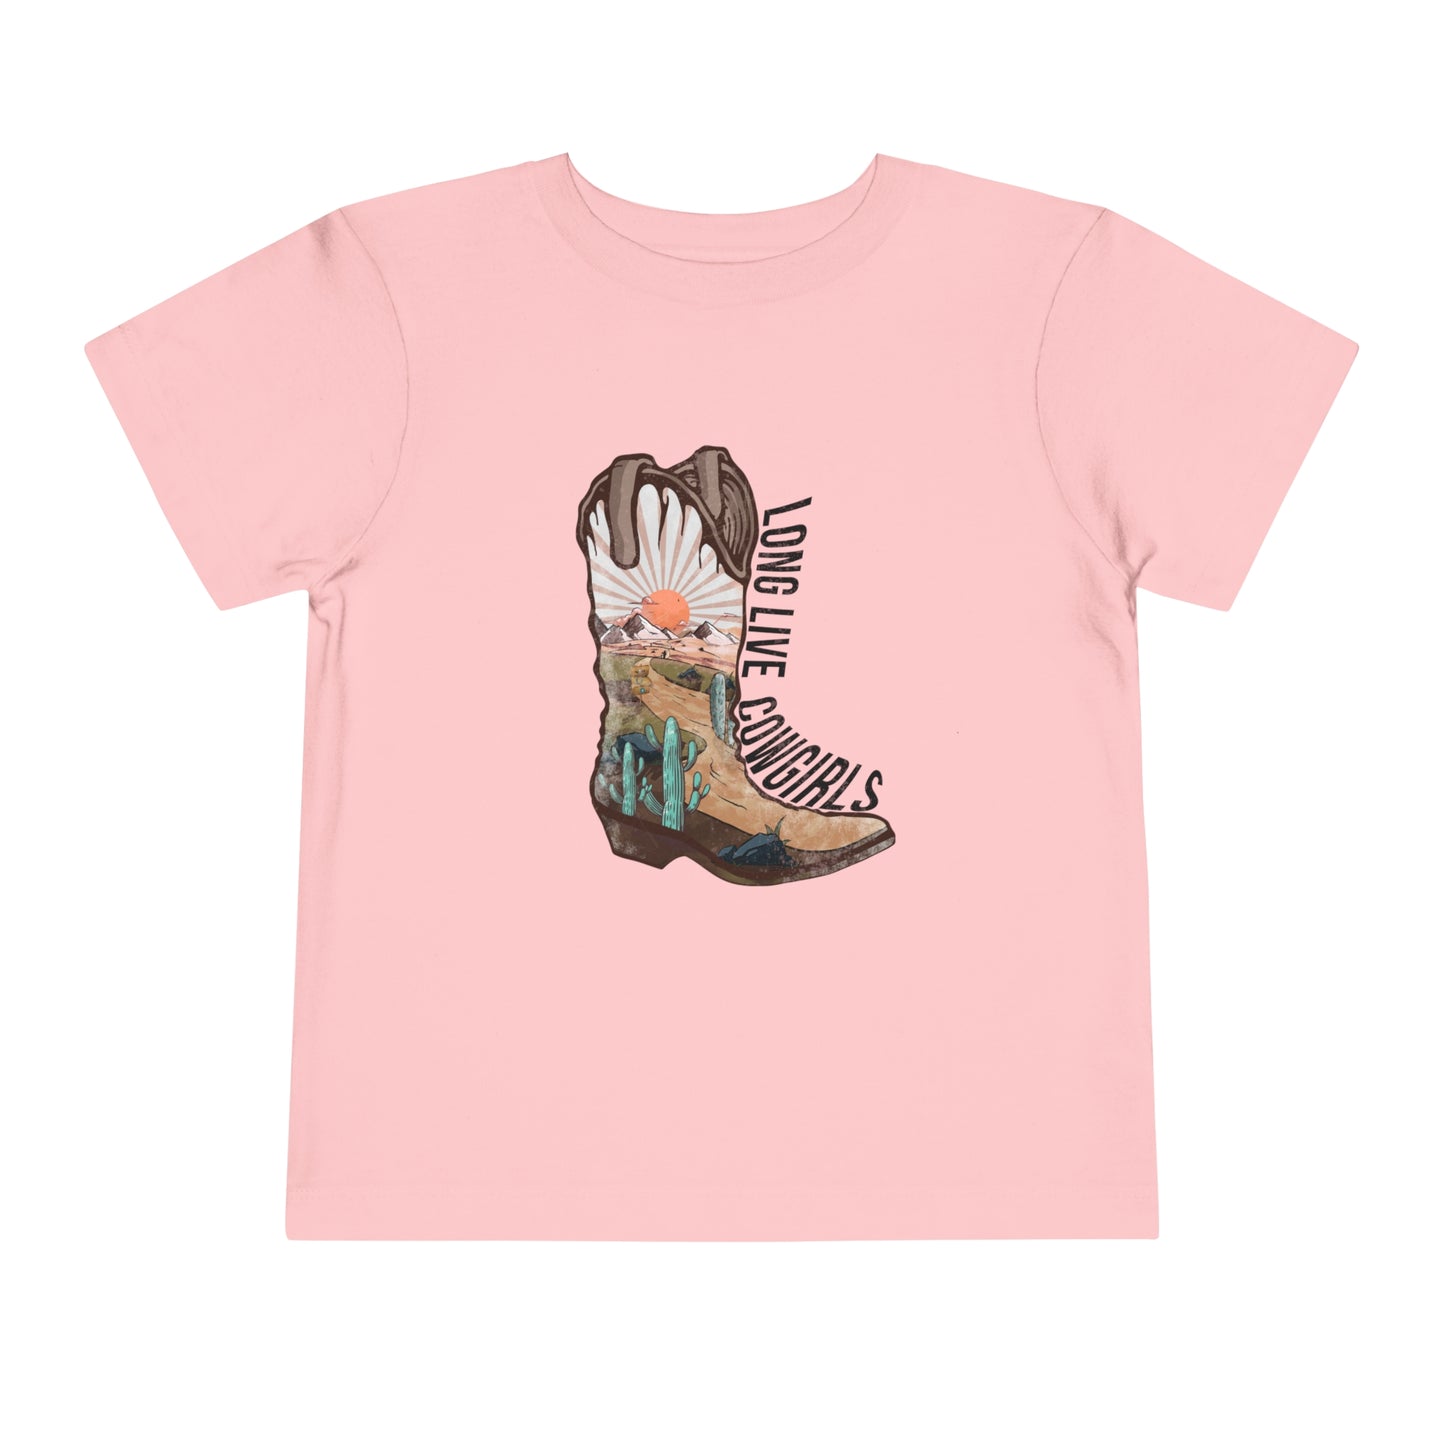 Long Live Cowgirls | Toddler T-shirt | Retro Western Toddler Tee